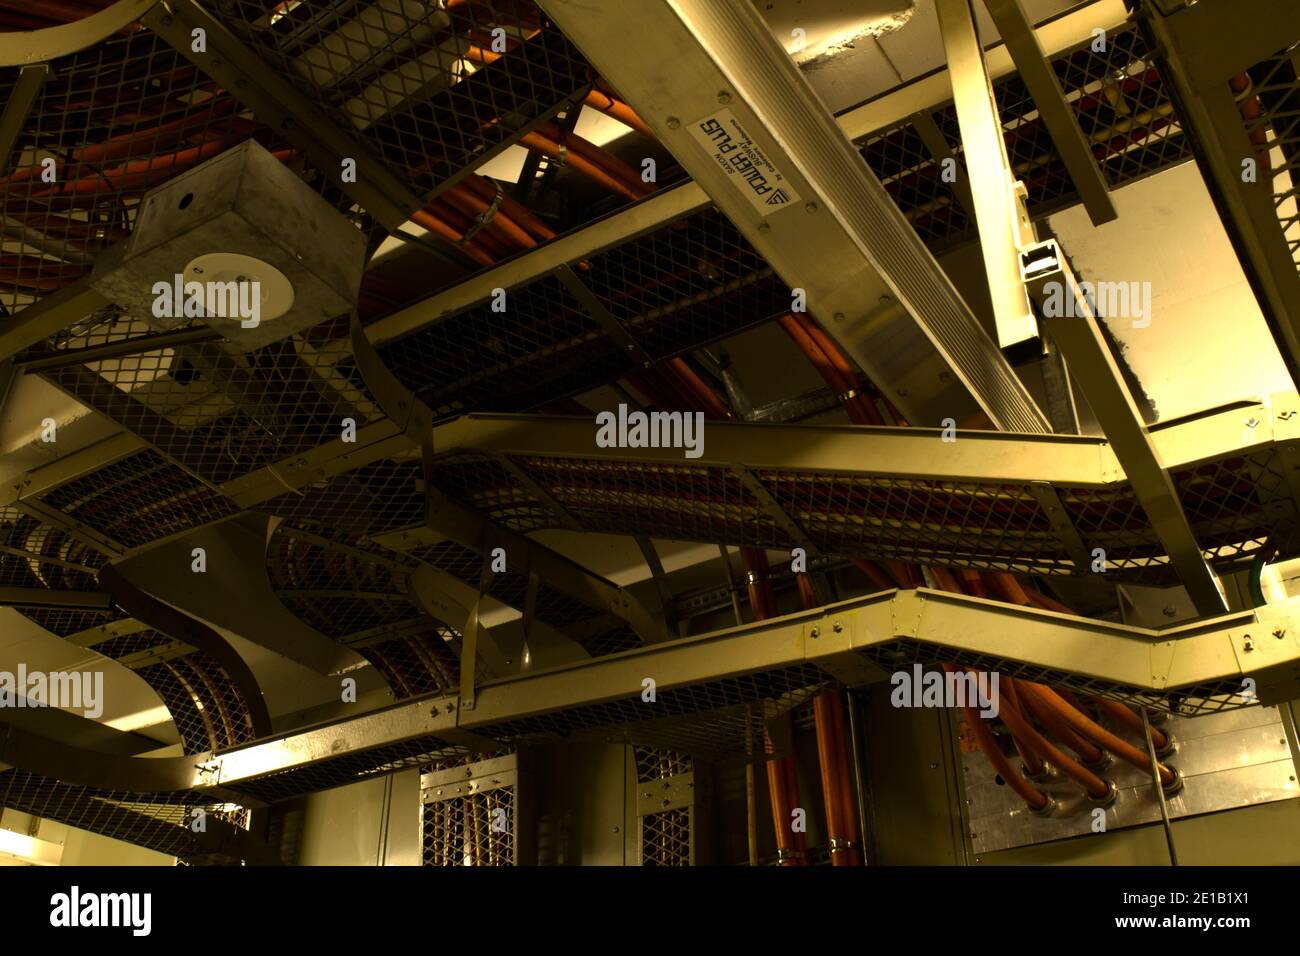 Overhead/ceiling IT Network and Comms cabling in Lower Basement of an old, 25+ story city building (c.1970's). Stock Photo